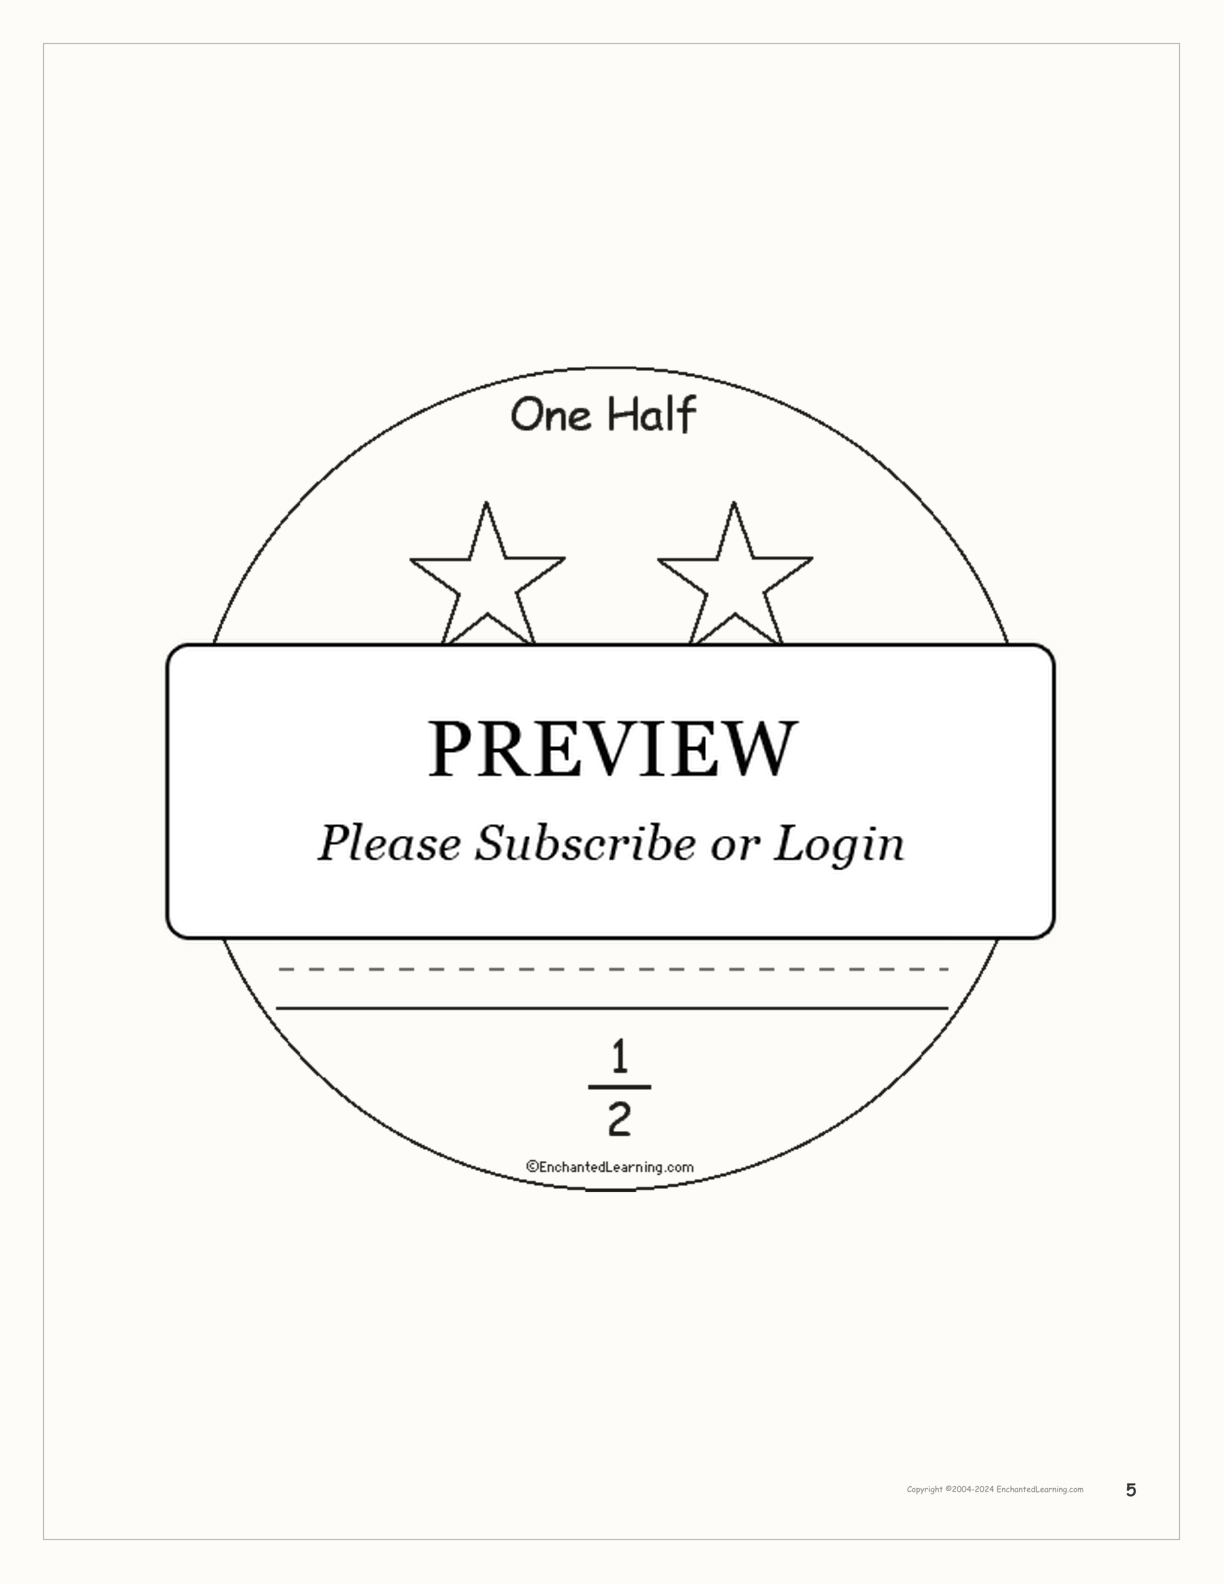 One Half: A Book on Fractions interactive printout page 5